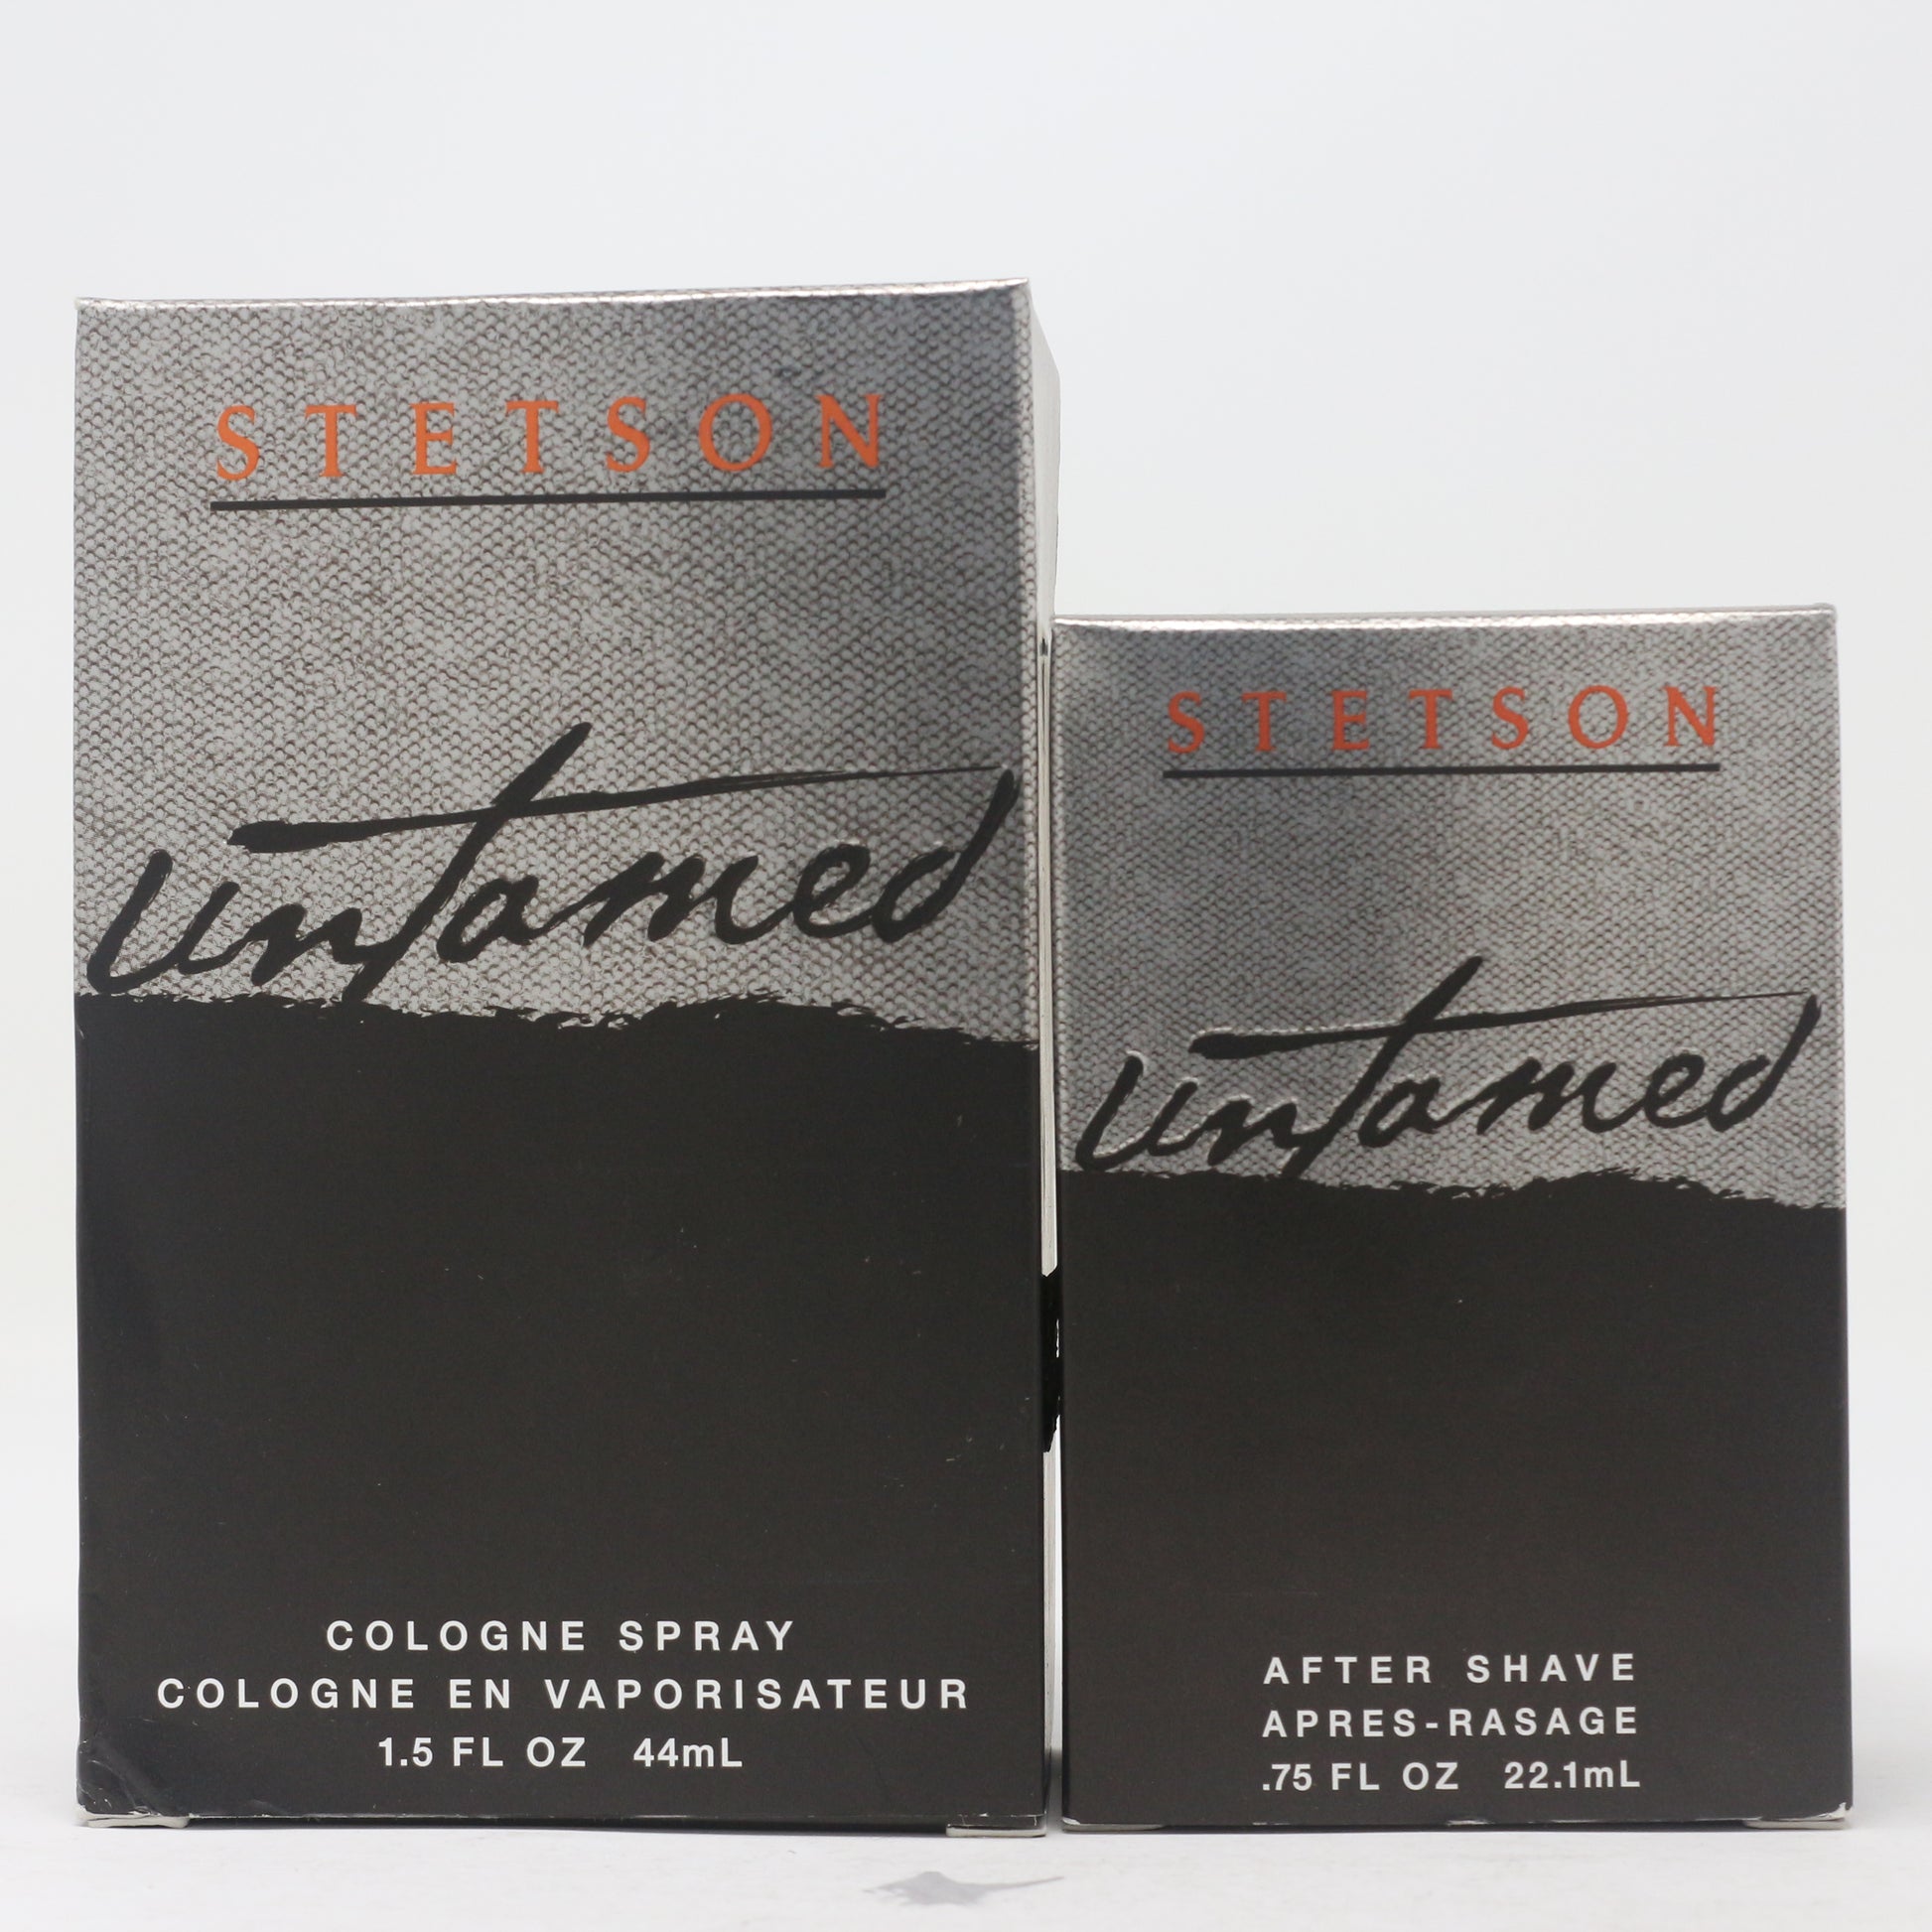 Stetson Untamed Cologne Spray & After Shave mL